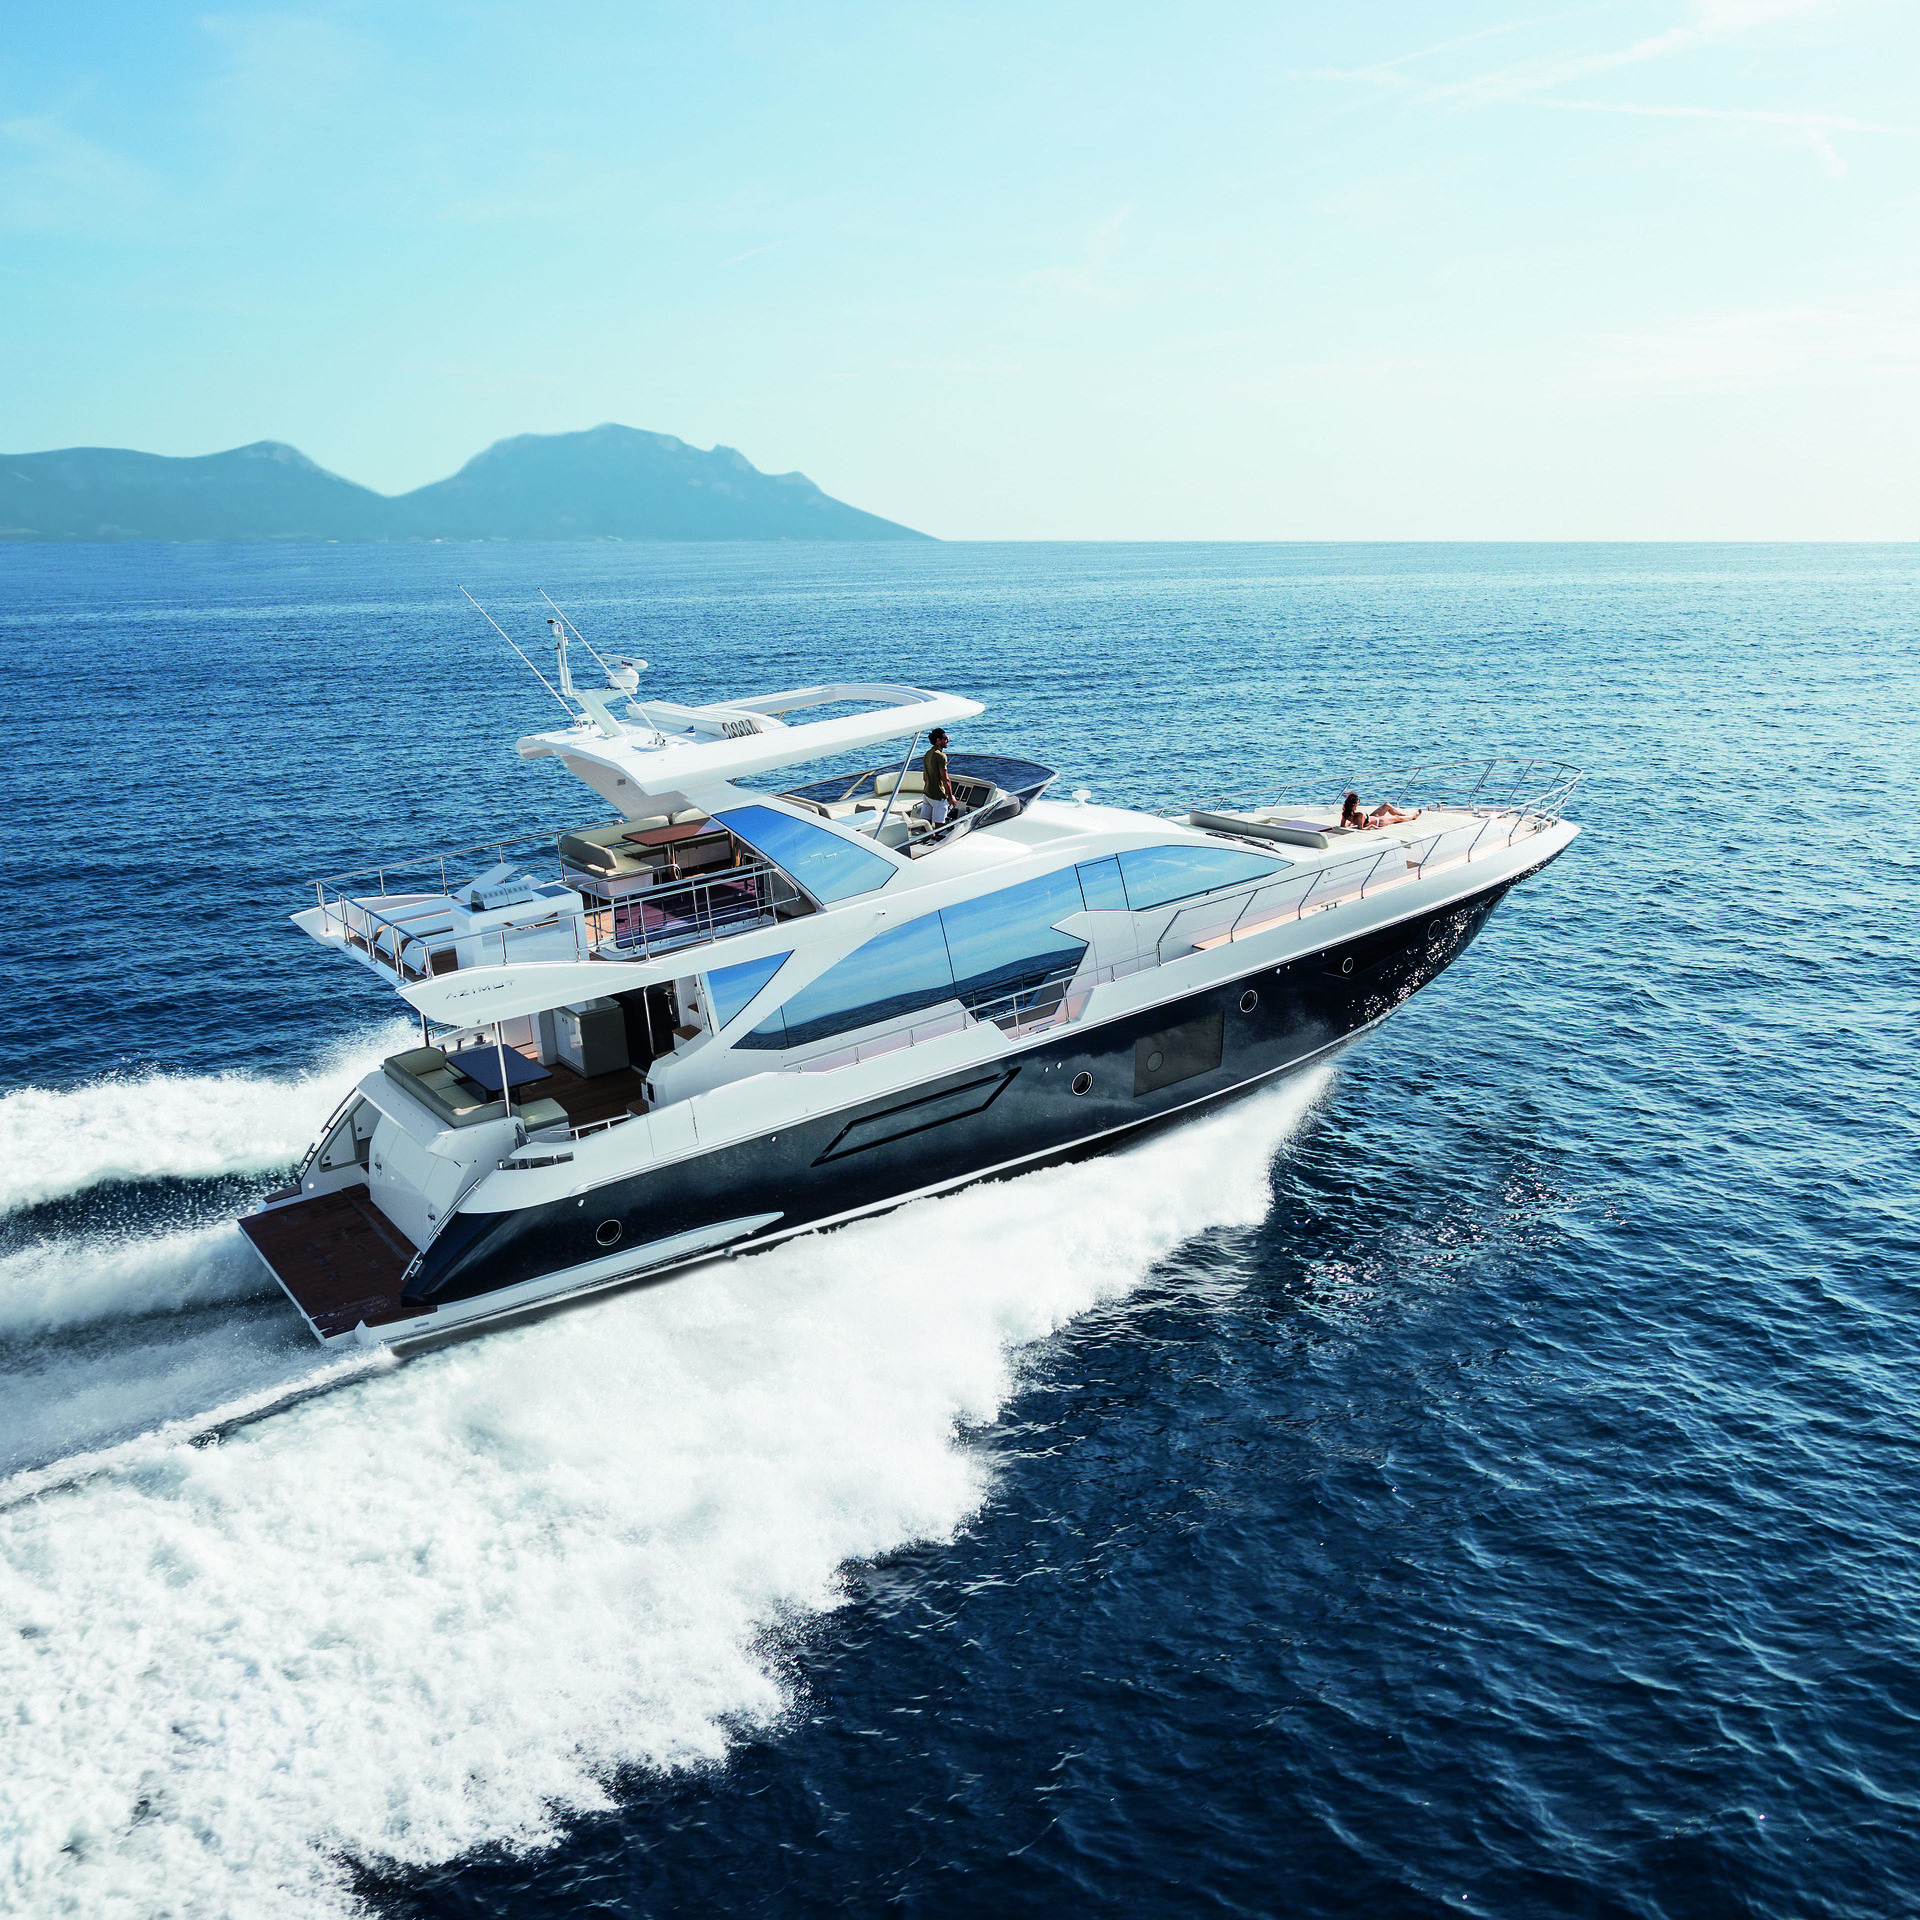 360 VR Virtual Tours of the Azimut Fly 74